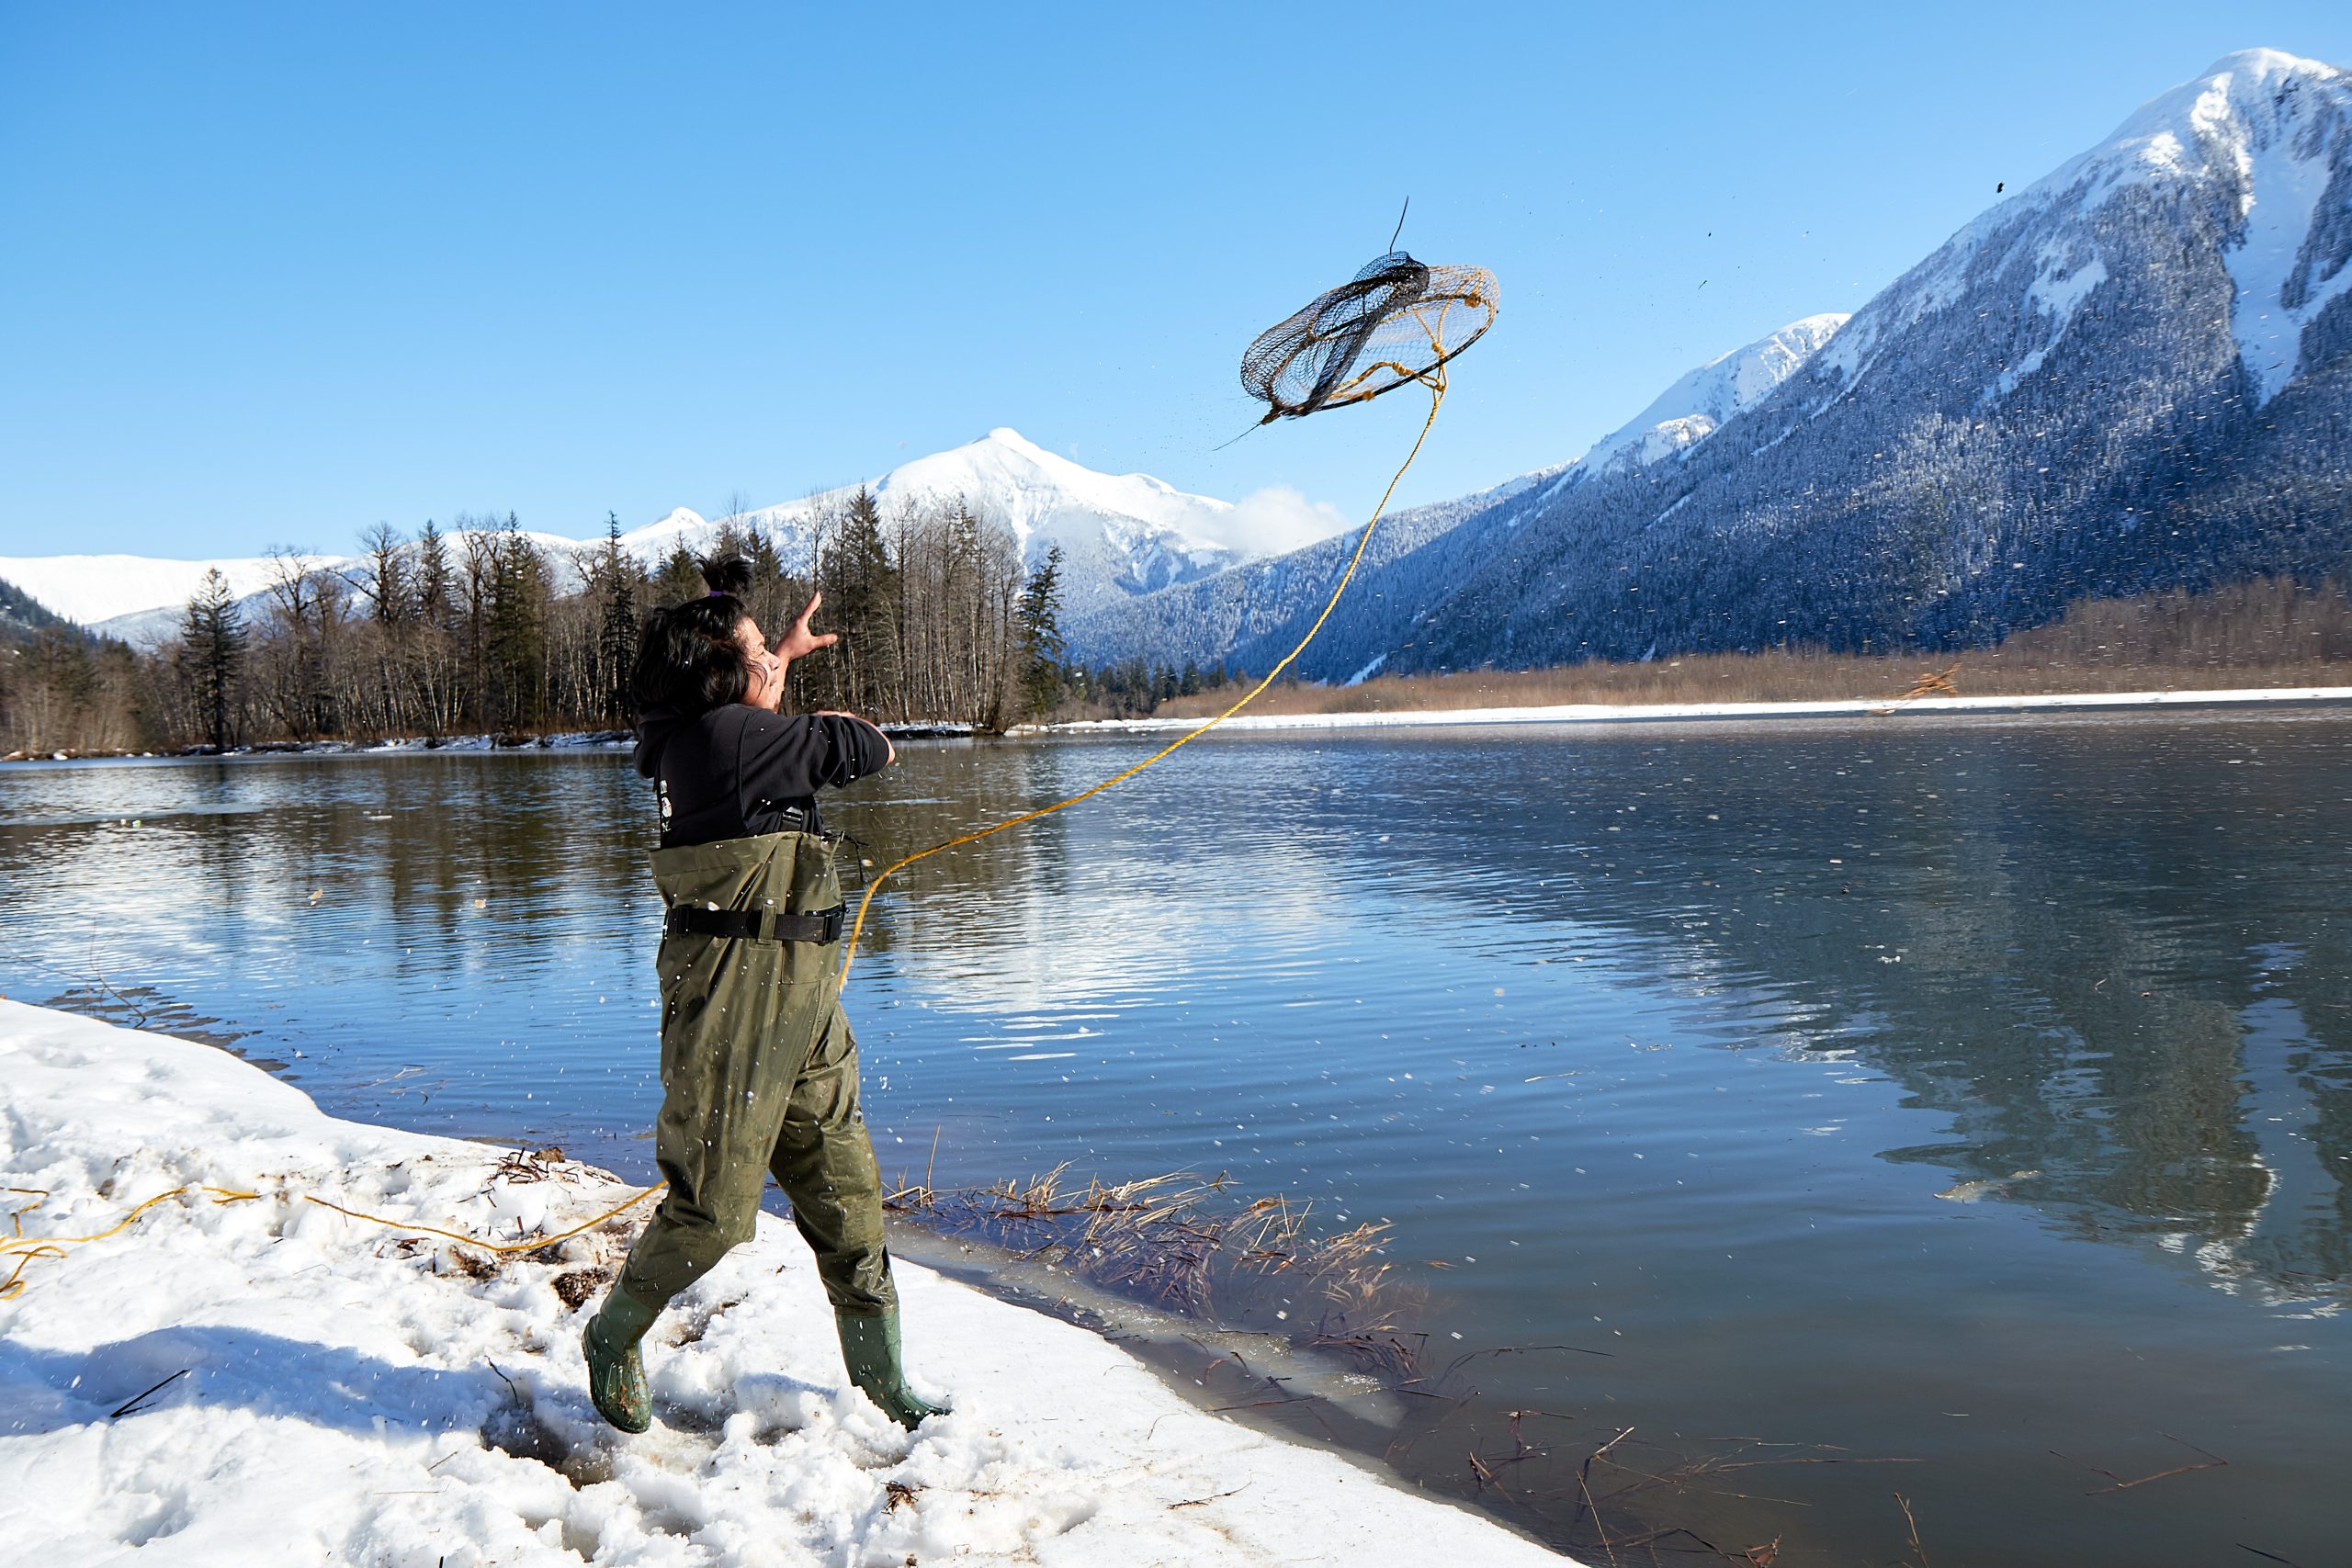 A person wearing chest-high waterproof pants and rubber boots hurls a conical net on a rope into the water. Snow-capped mountains frame the opposite shore.